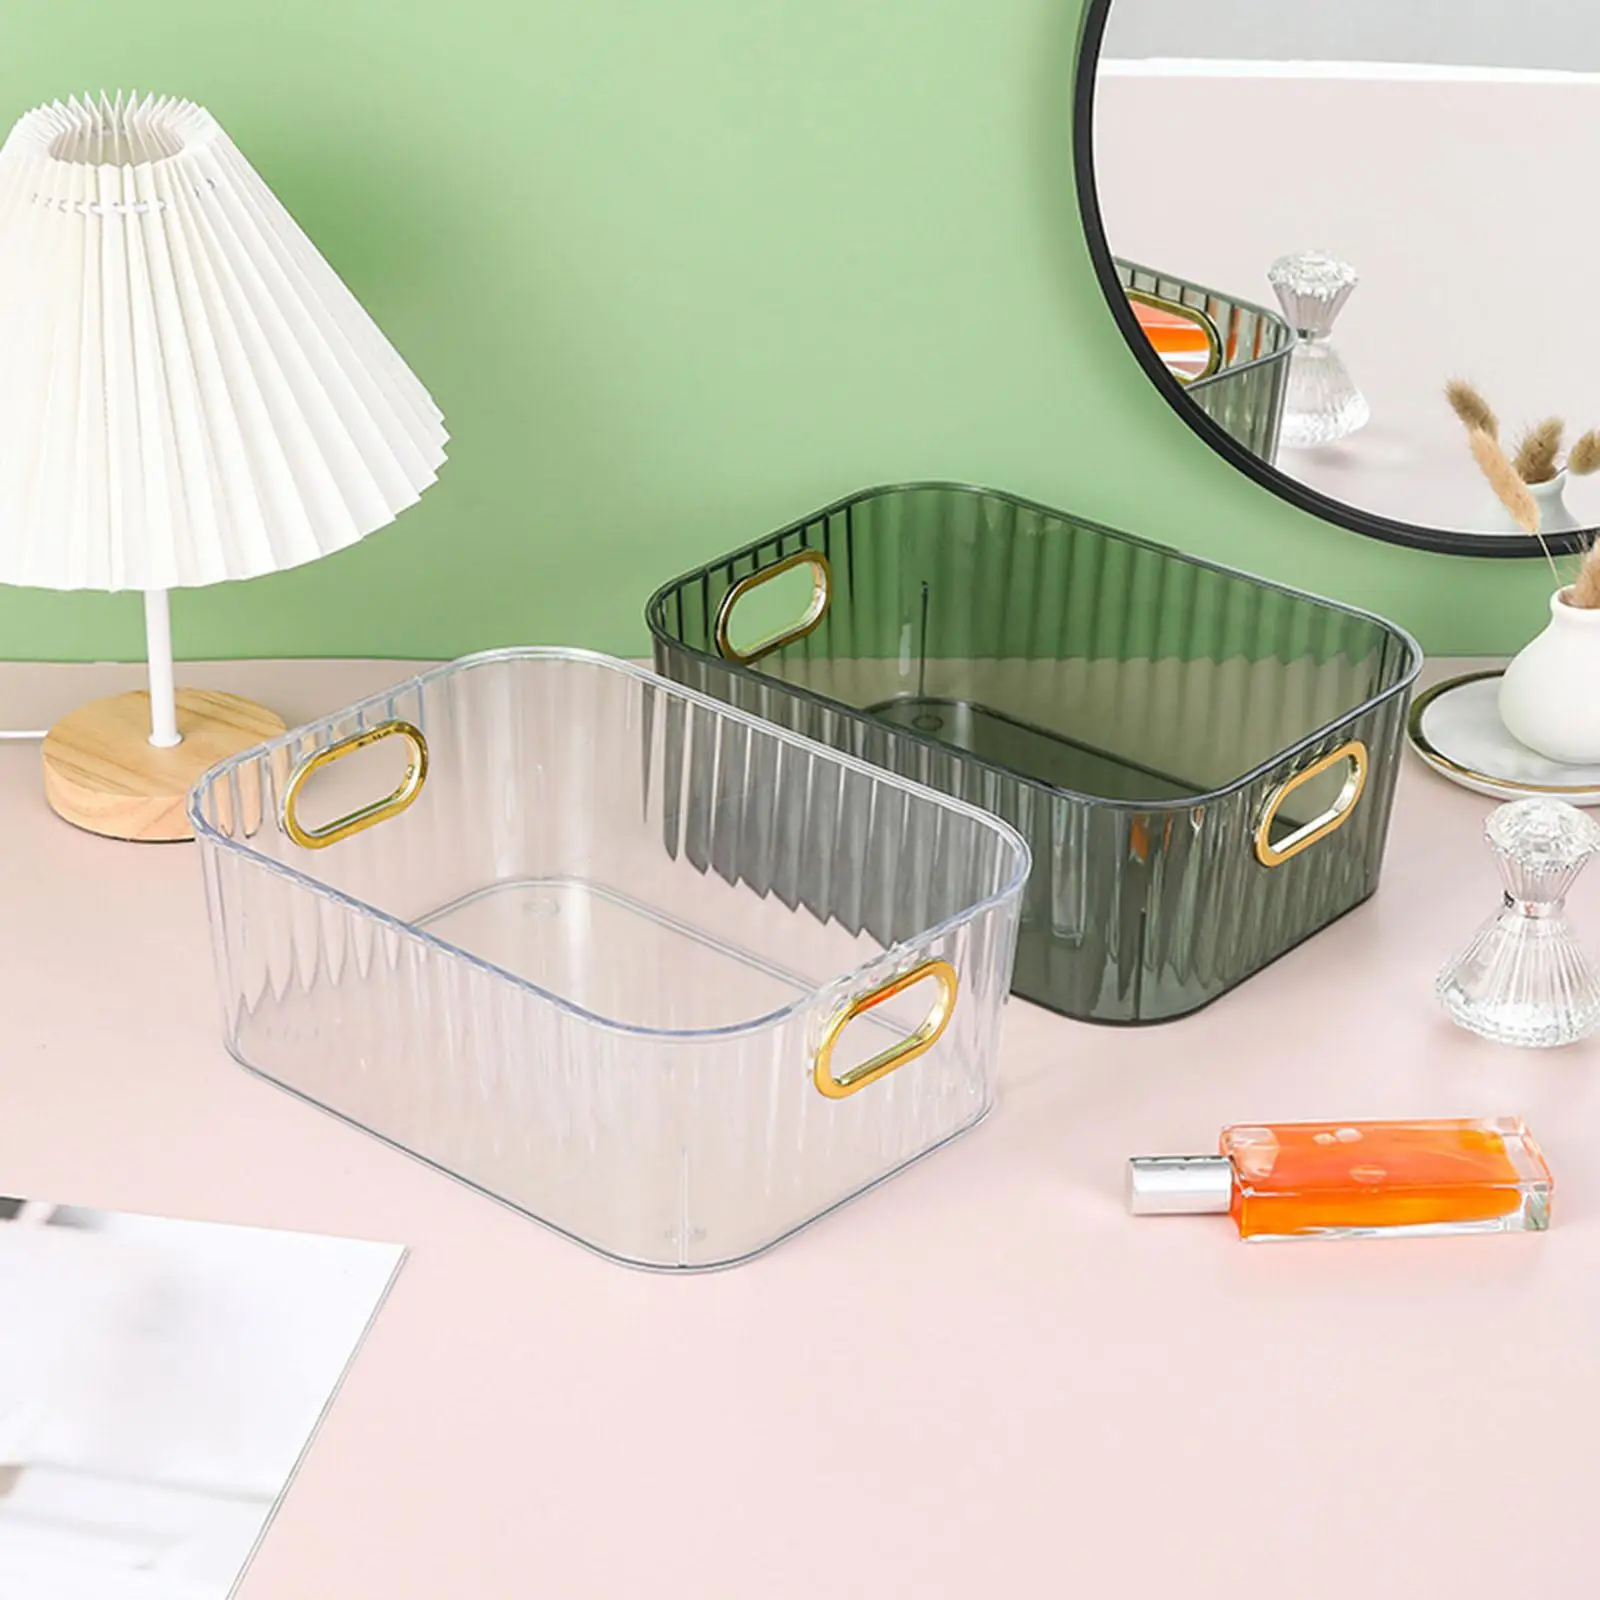 Storage Bin with Handle Rectangular Organization Container Basket for Lipstick Pencils Cosmetics Pantry Shelf Pantry Cabinet